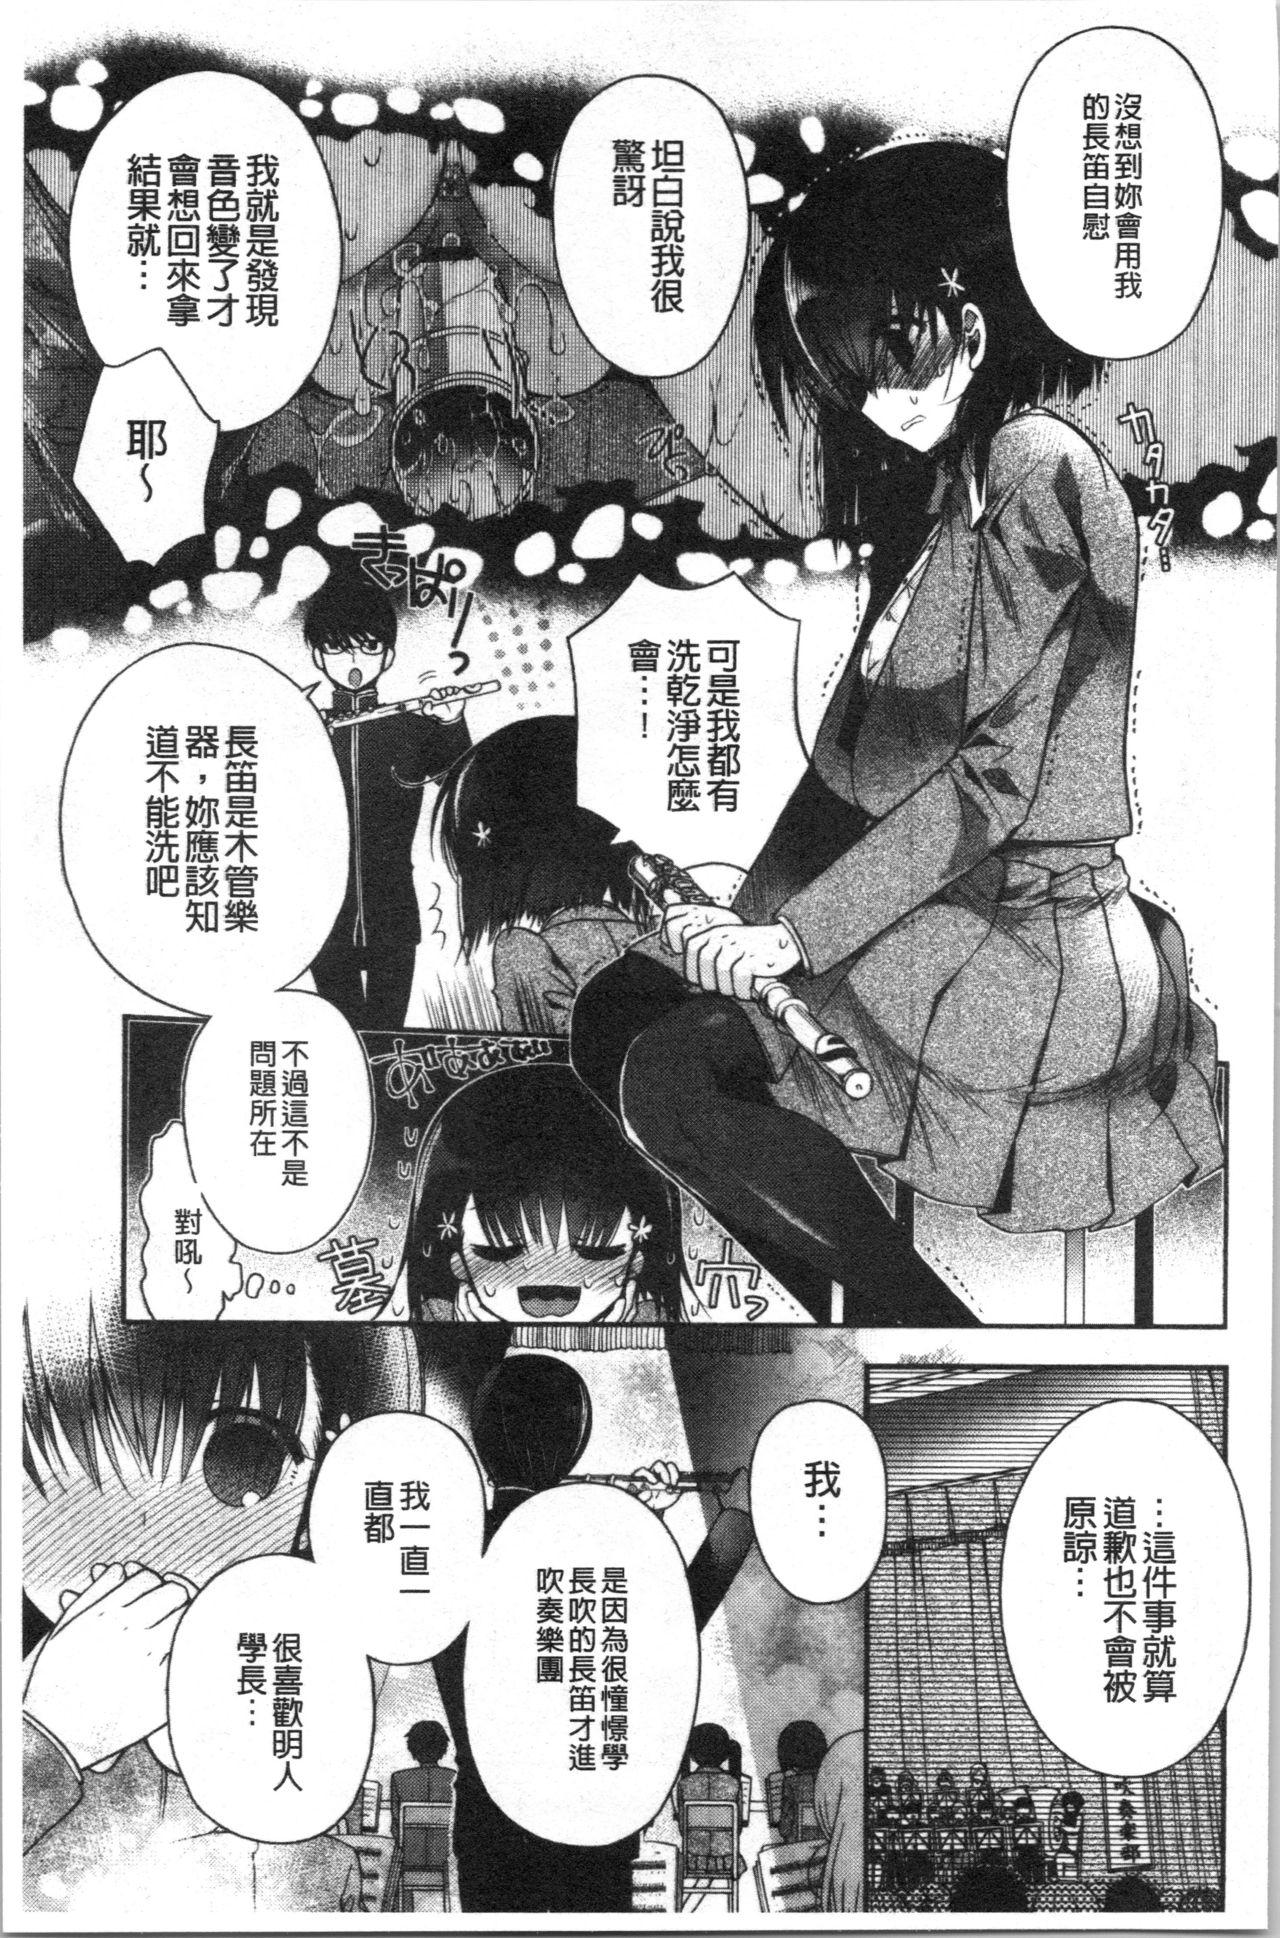 Hatsukoi Melty - Melty First Love 8